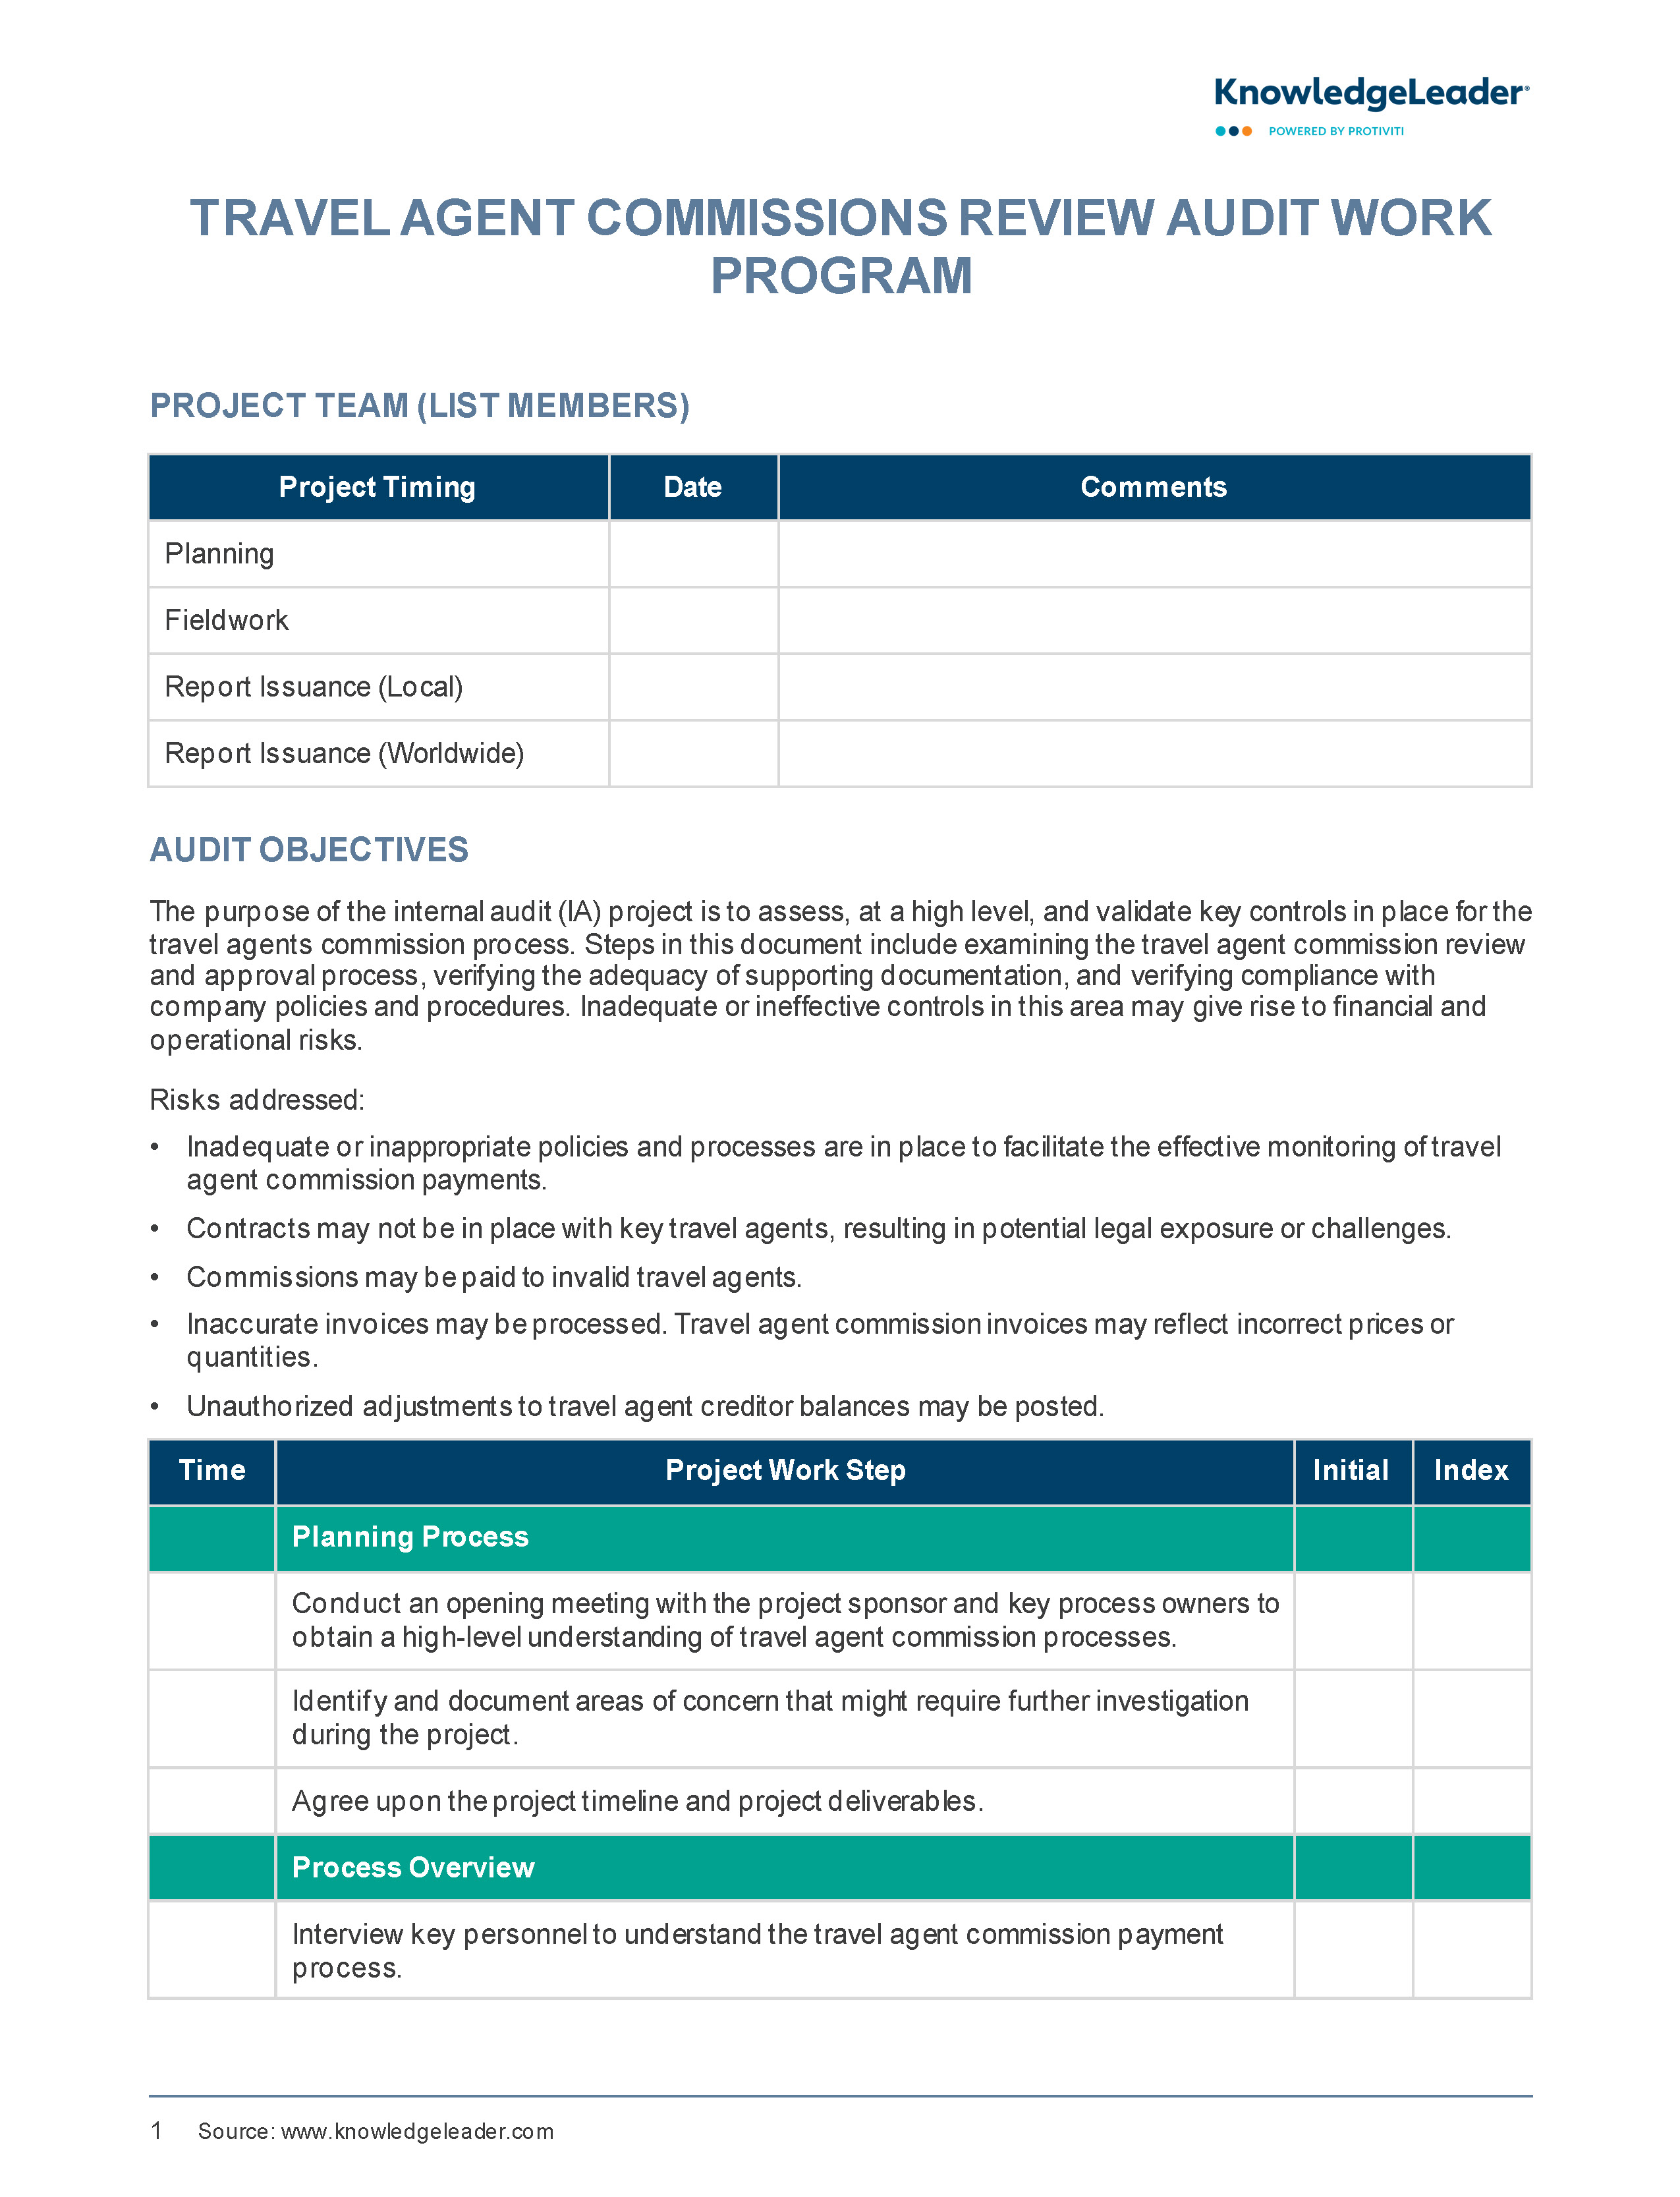 Screenshot of the first page of Travel Agent Commissions Audit Work Program